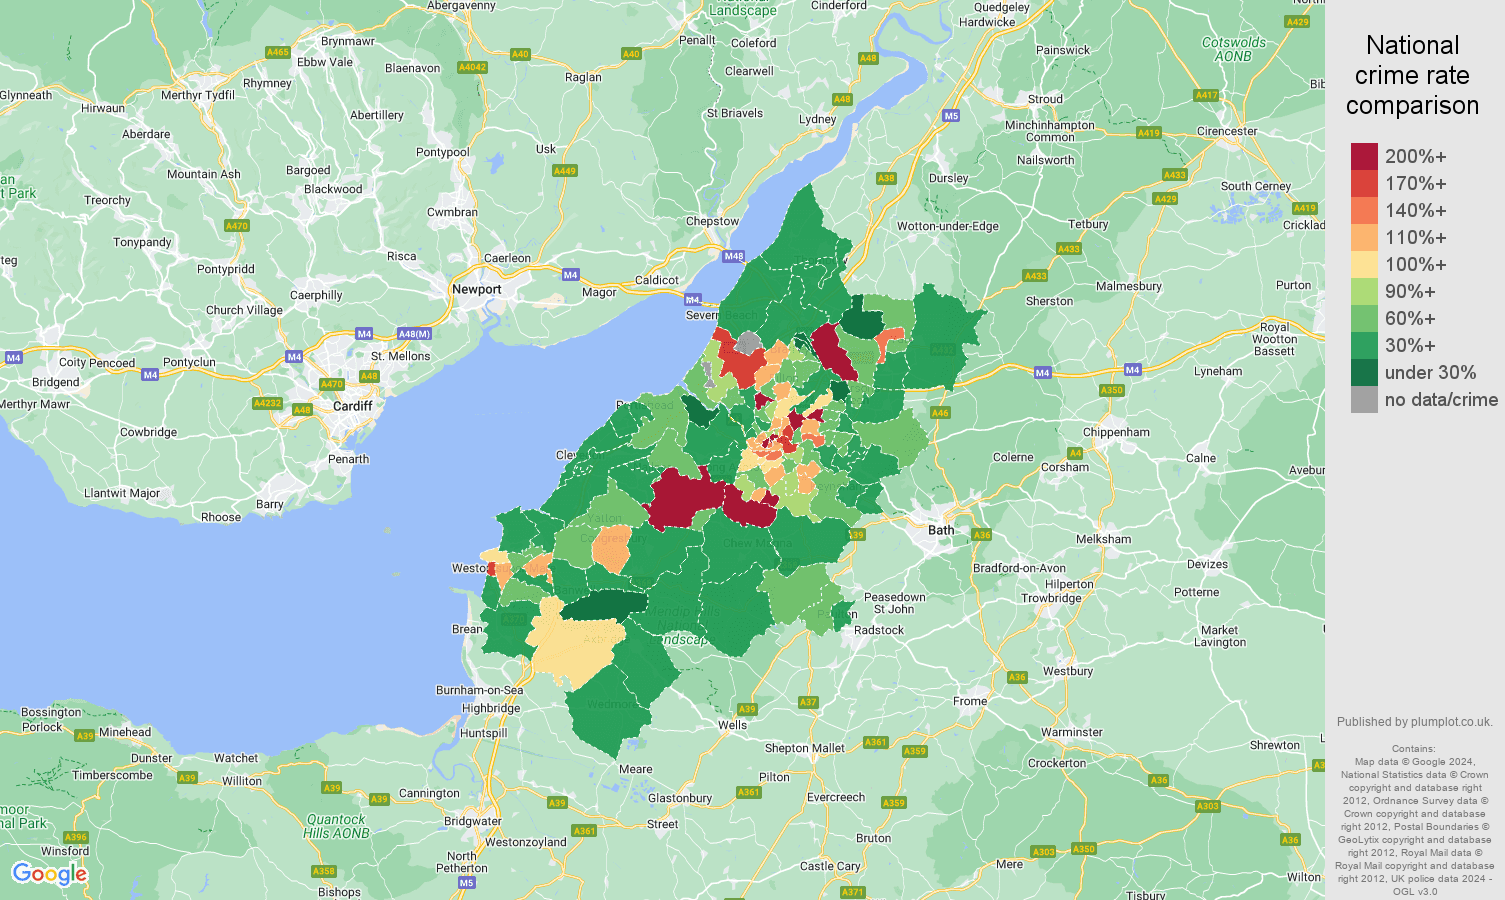 Bristol other theft crime rate comparison map